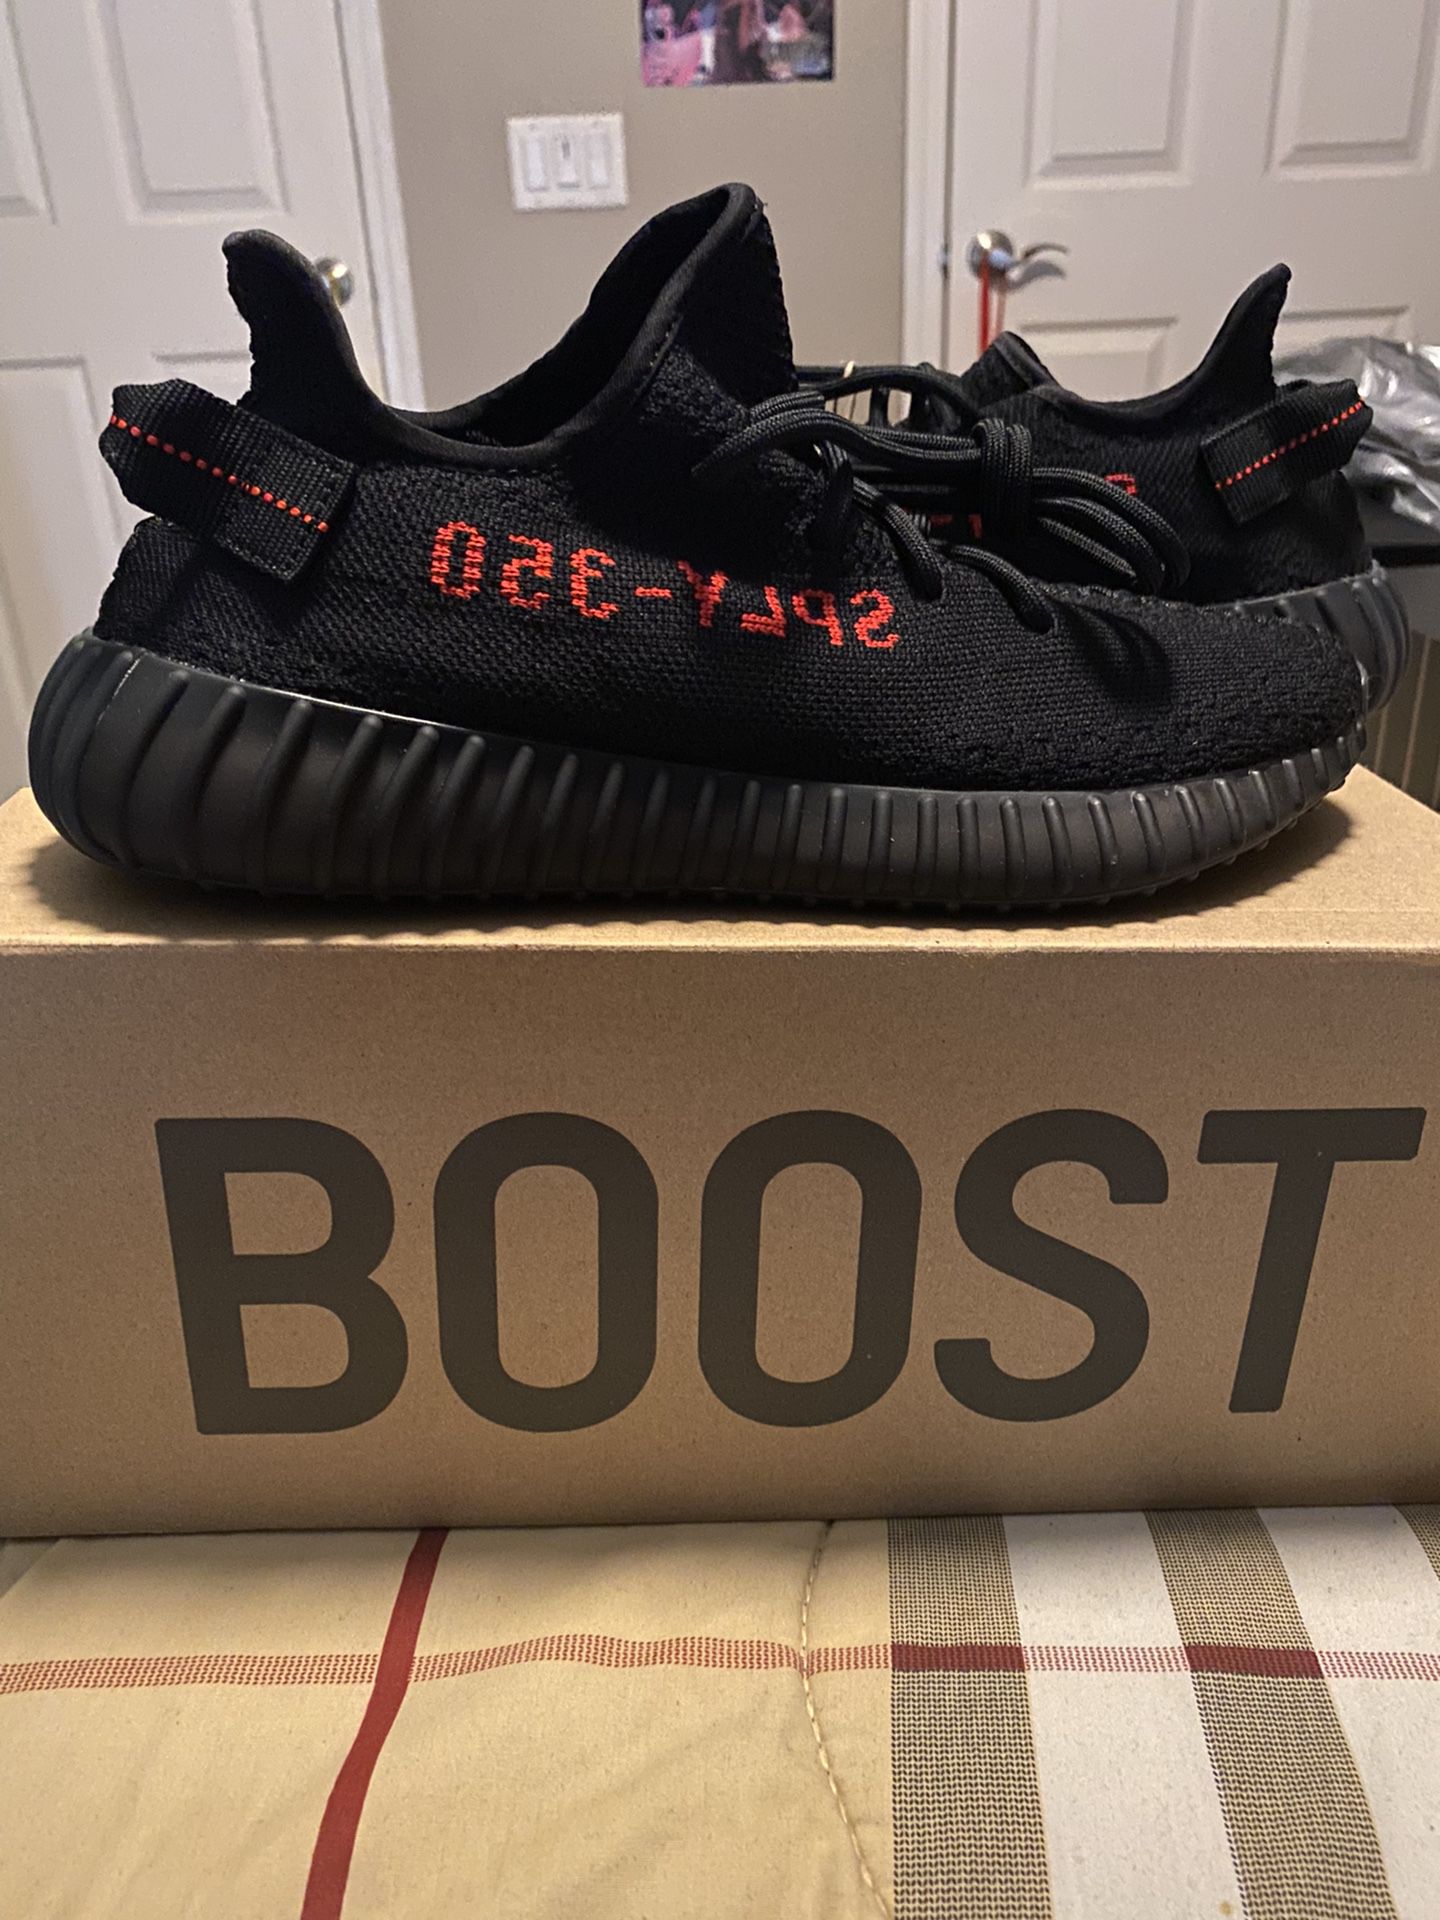 Adidas Yeezy Boost 350 V2 Black for Sale in Canyon Country, CA - OfferUp